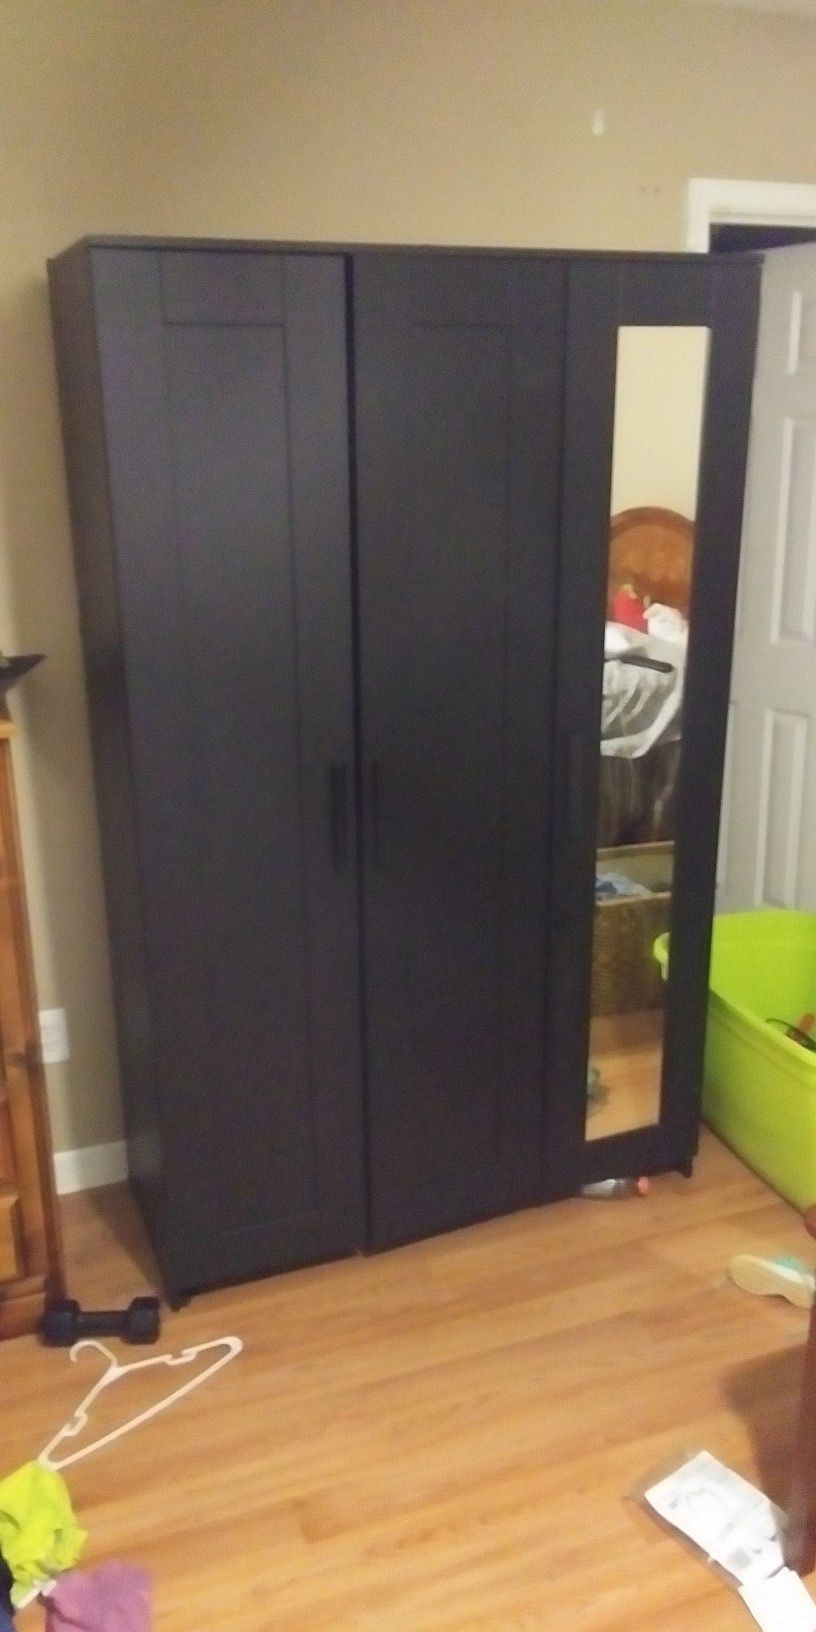 Extra closet . built in mirror. No scratches or broke brand new